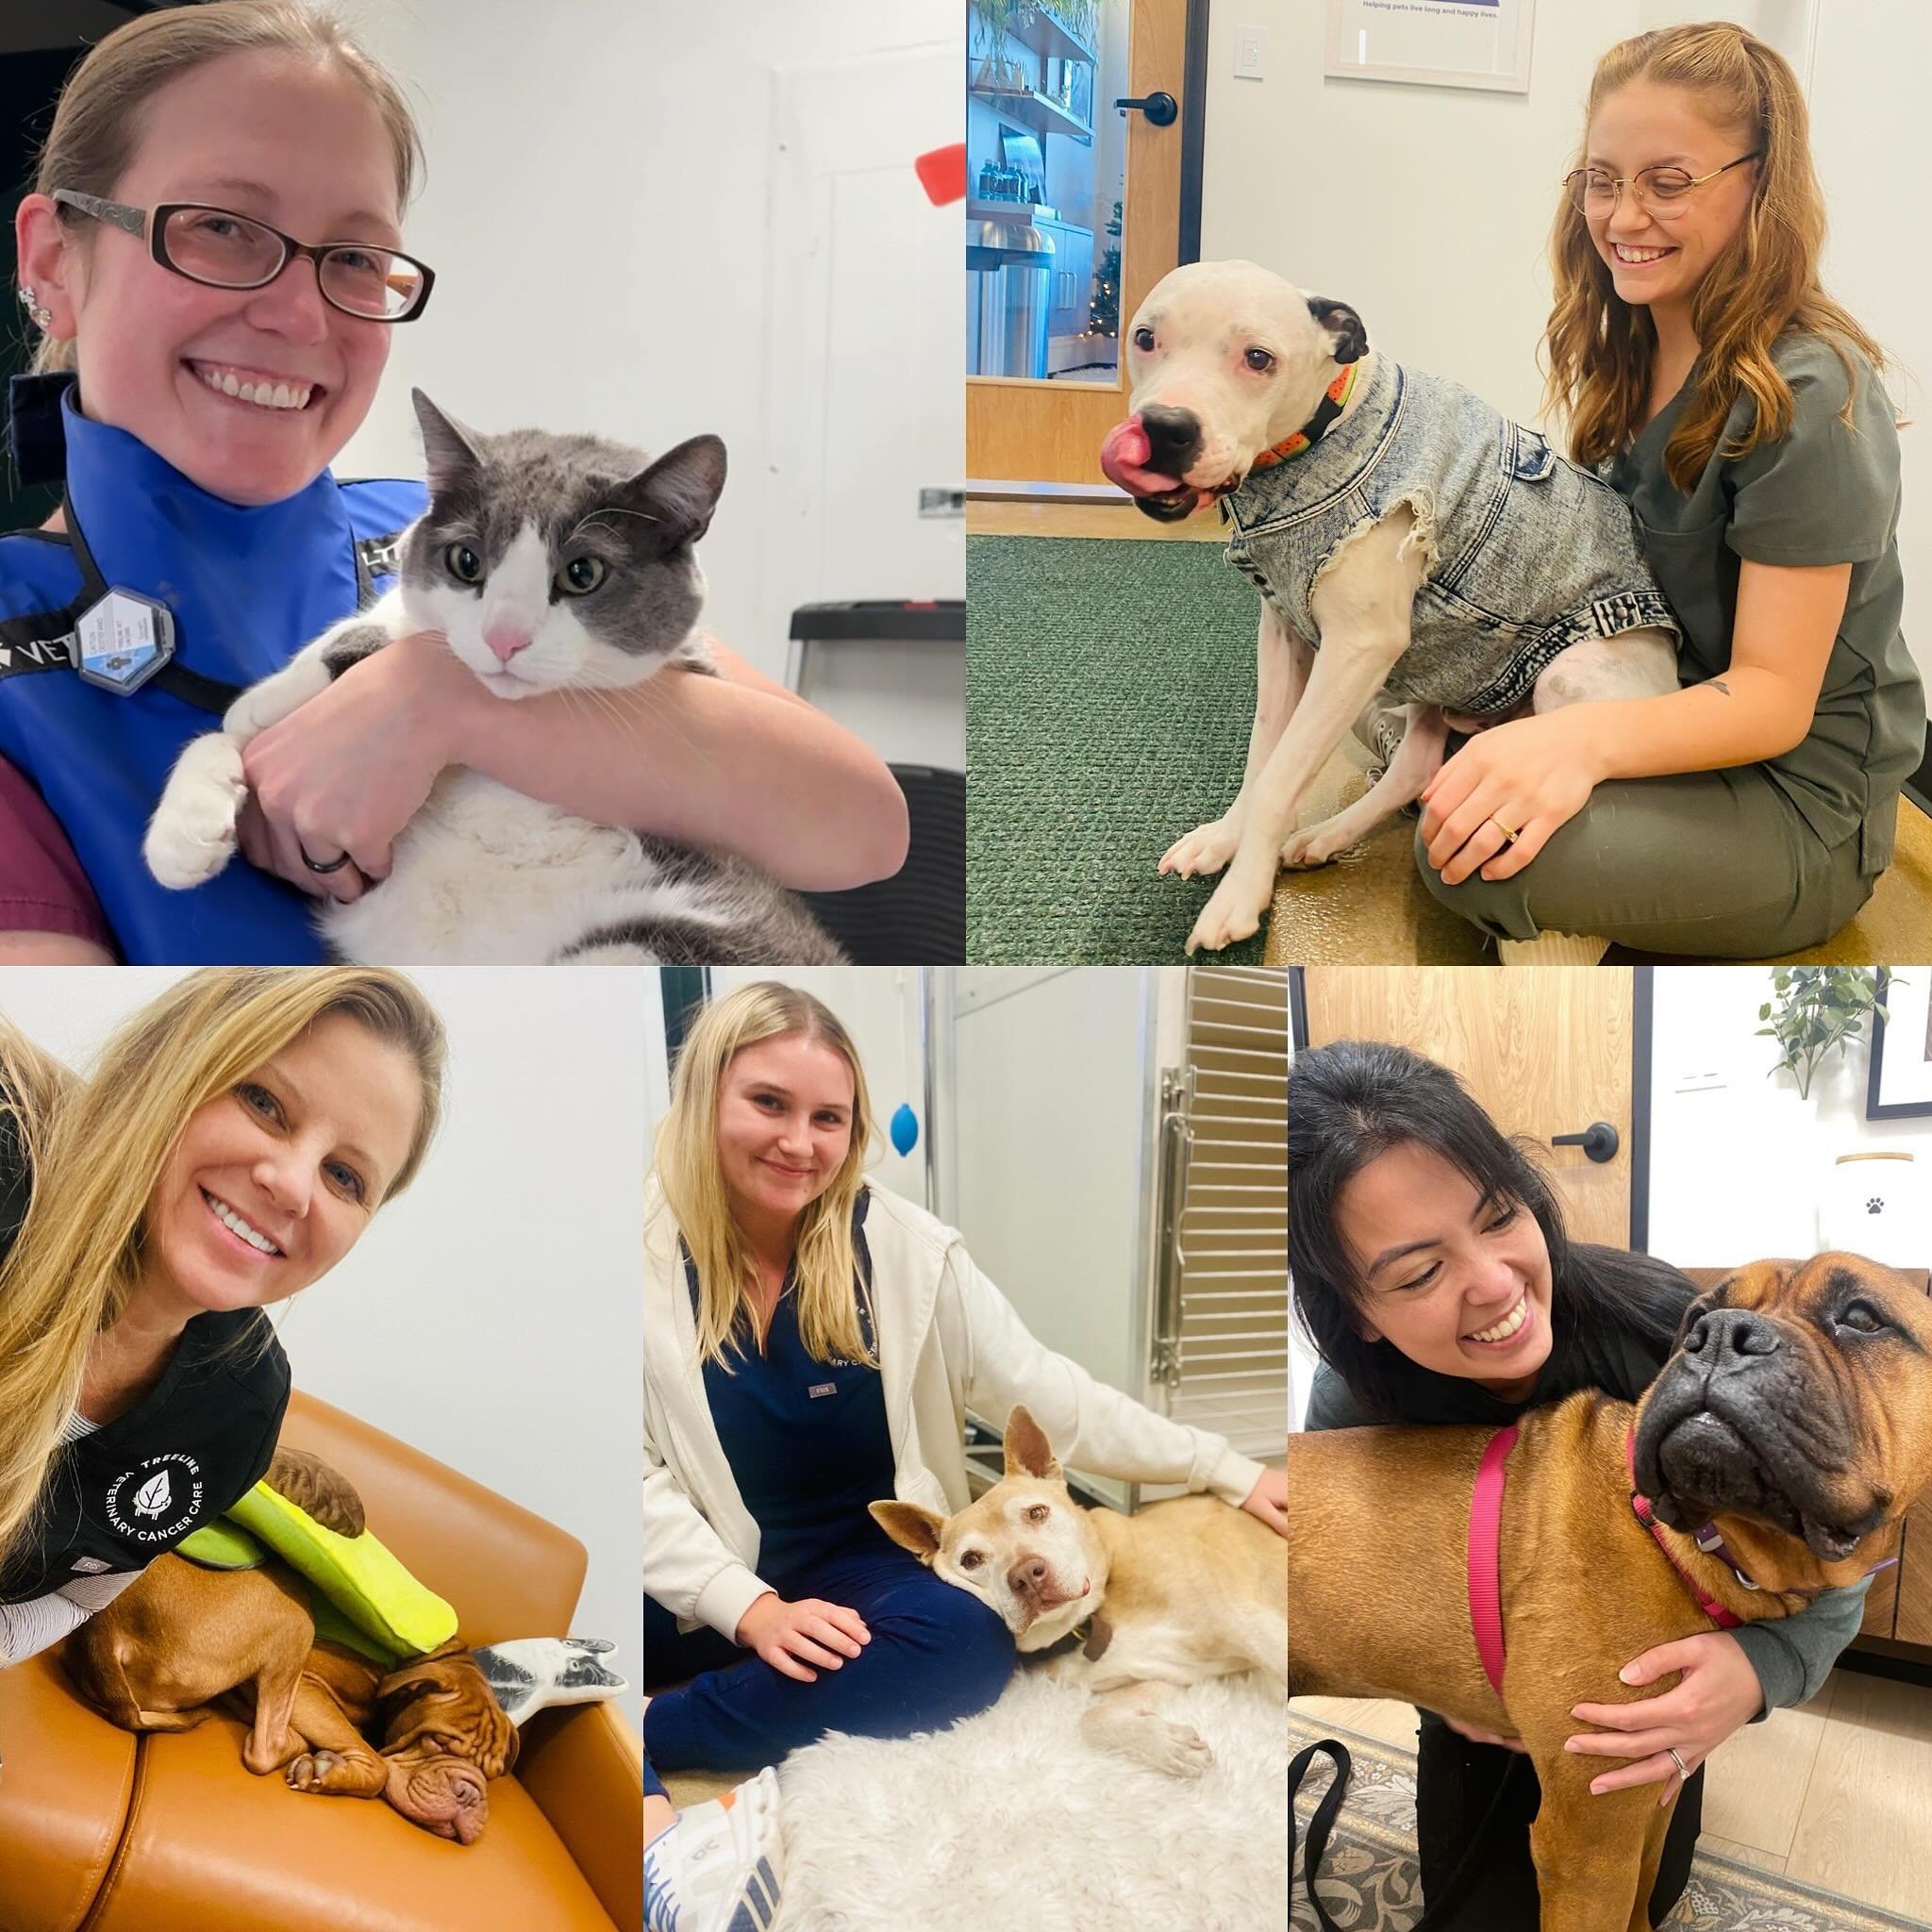 It&rsquo;s World Veterinary Day!  Thank you to all our colleagues that work tirelessly to protect the health of all animals.  We are in this together! ❤️🐕&zwj;🦺
#worldveterinaryday 
#TreelineVet #AnimalCancer #VeterinaryOncology #VeterinaryCancer #